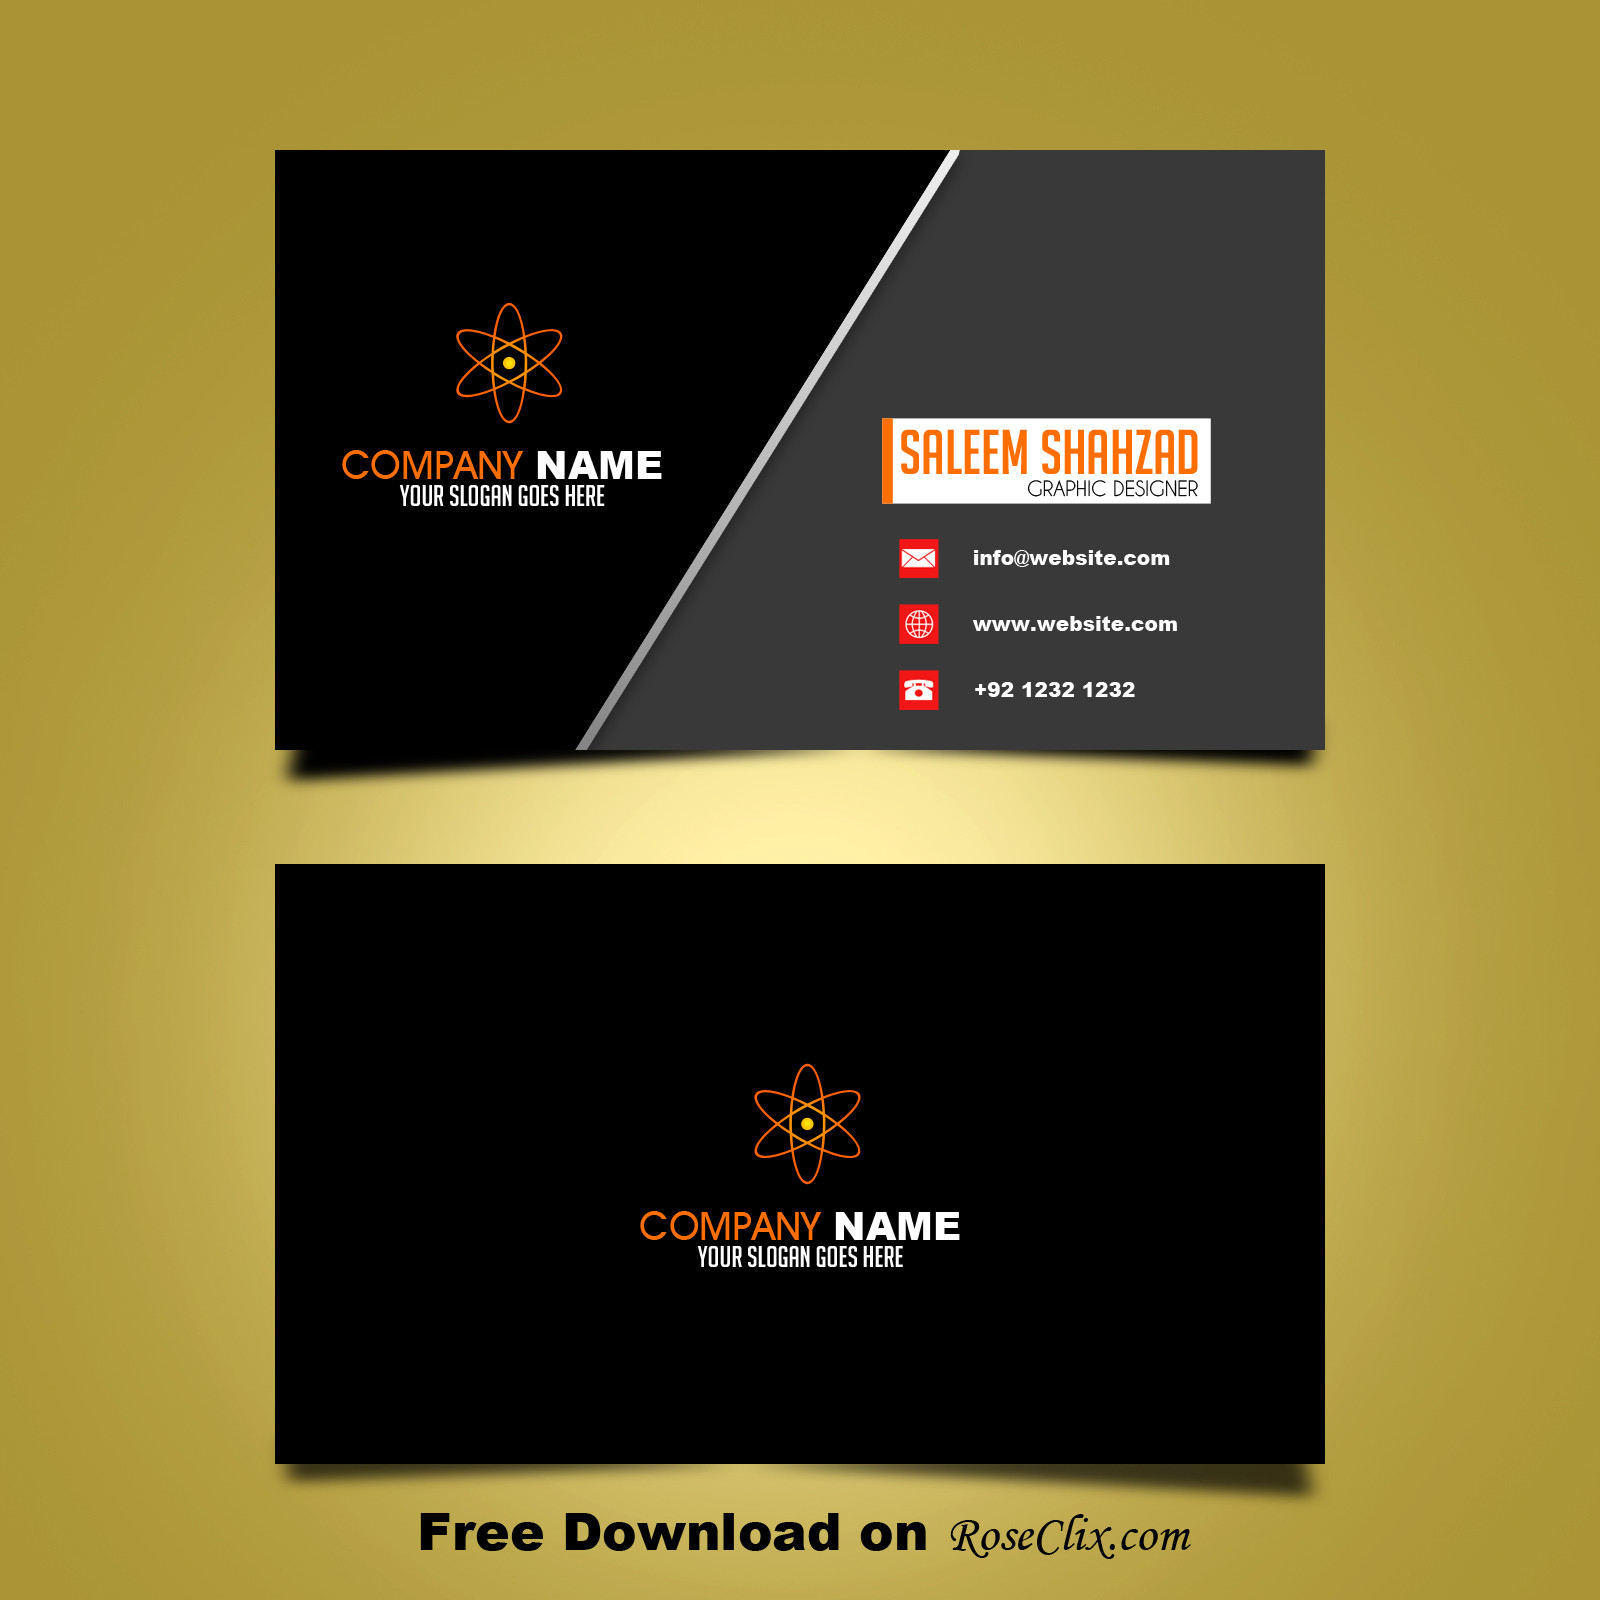 003 Free Downloads Business Cards Templates Template Ideas Of Business Card Psd Template Free Download